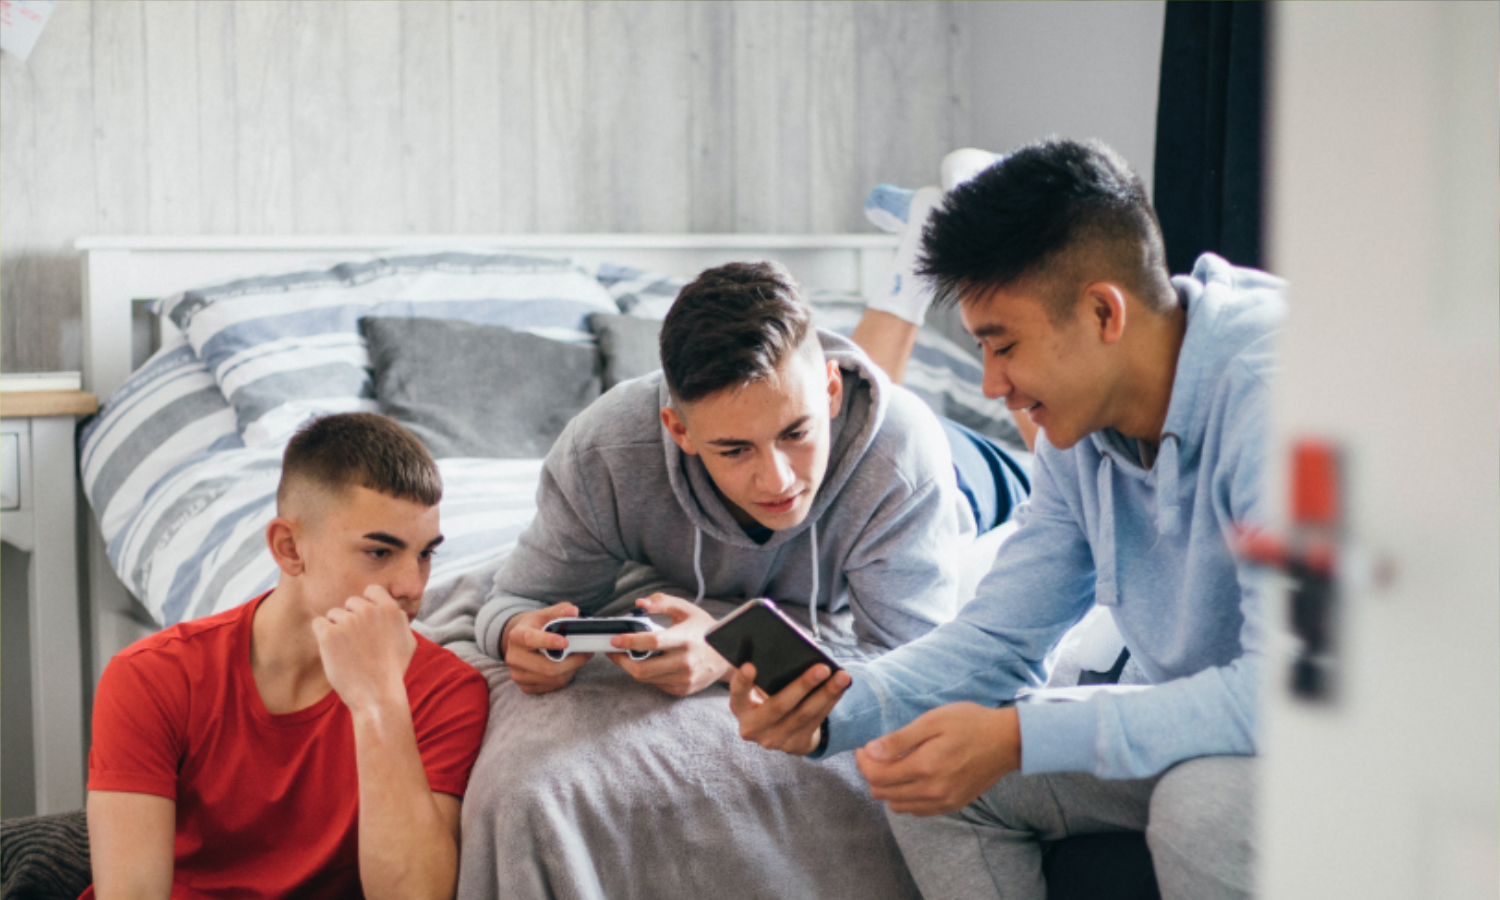 Young people playing on phones